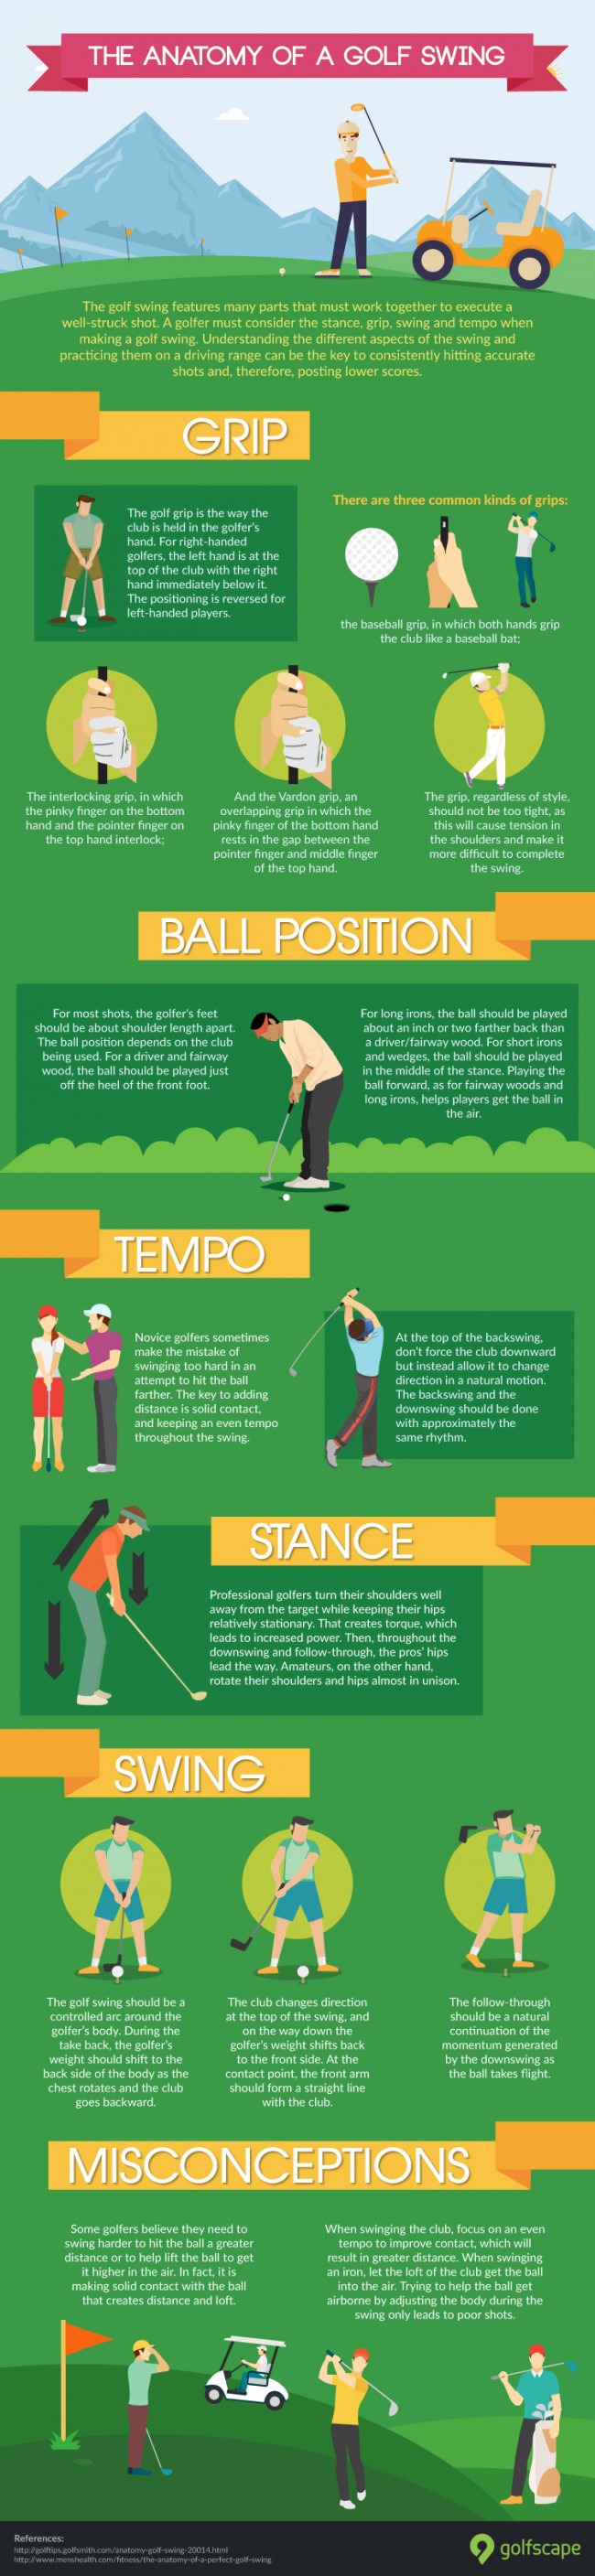 The Anatomy of a Golf Swing